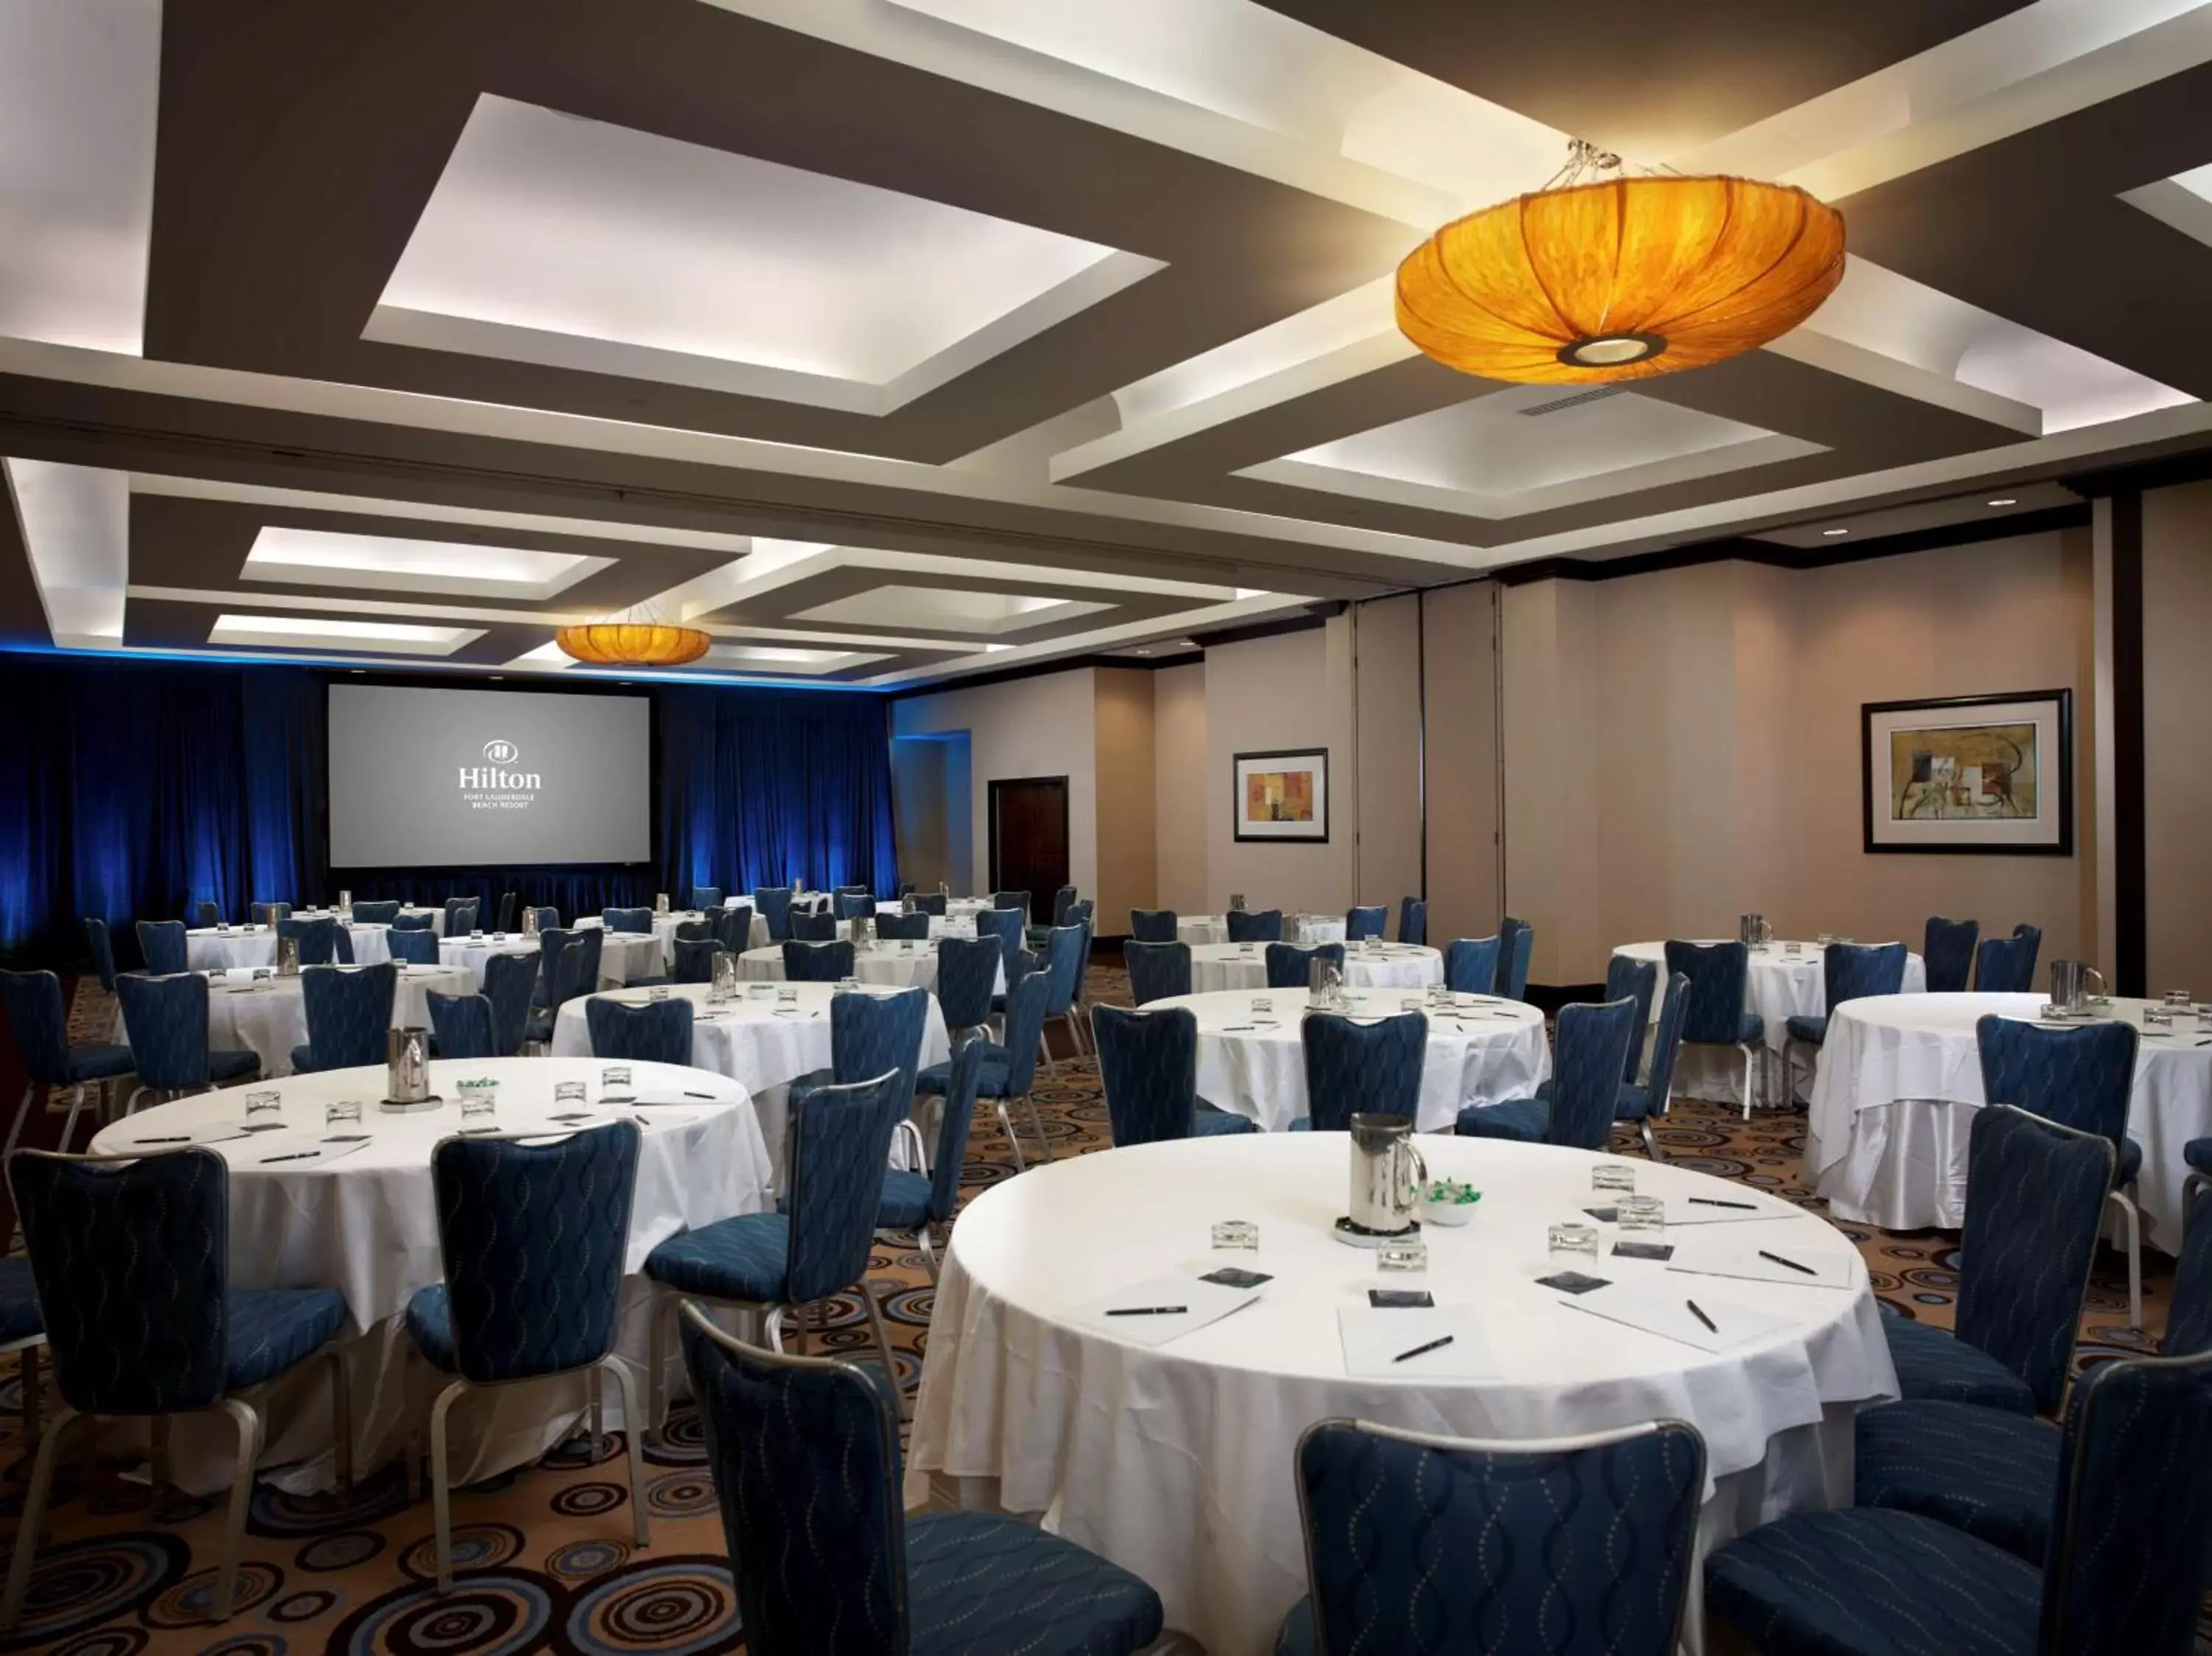 Meeting/conference room, Banquet Facilities in Hilton Fort Lauderdale Beach Resort